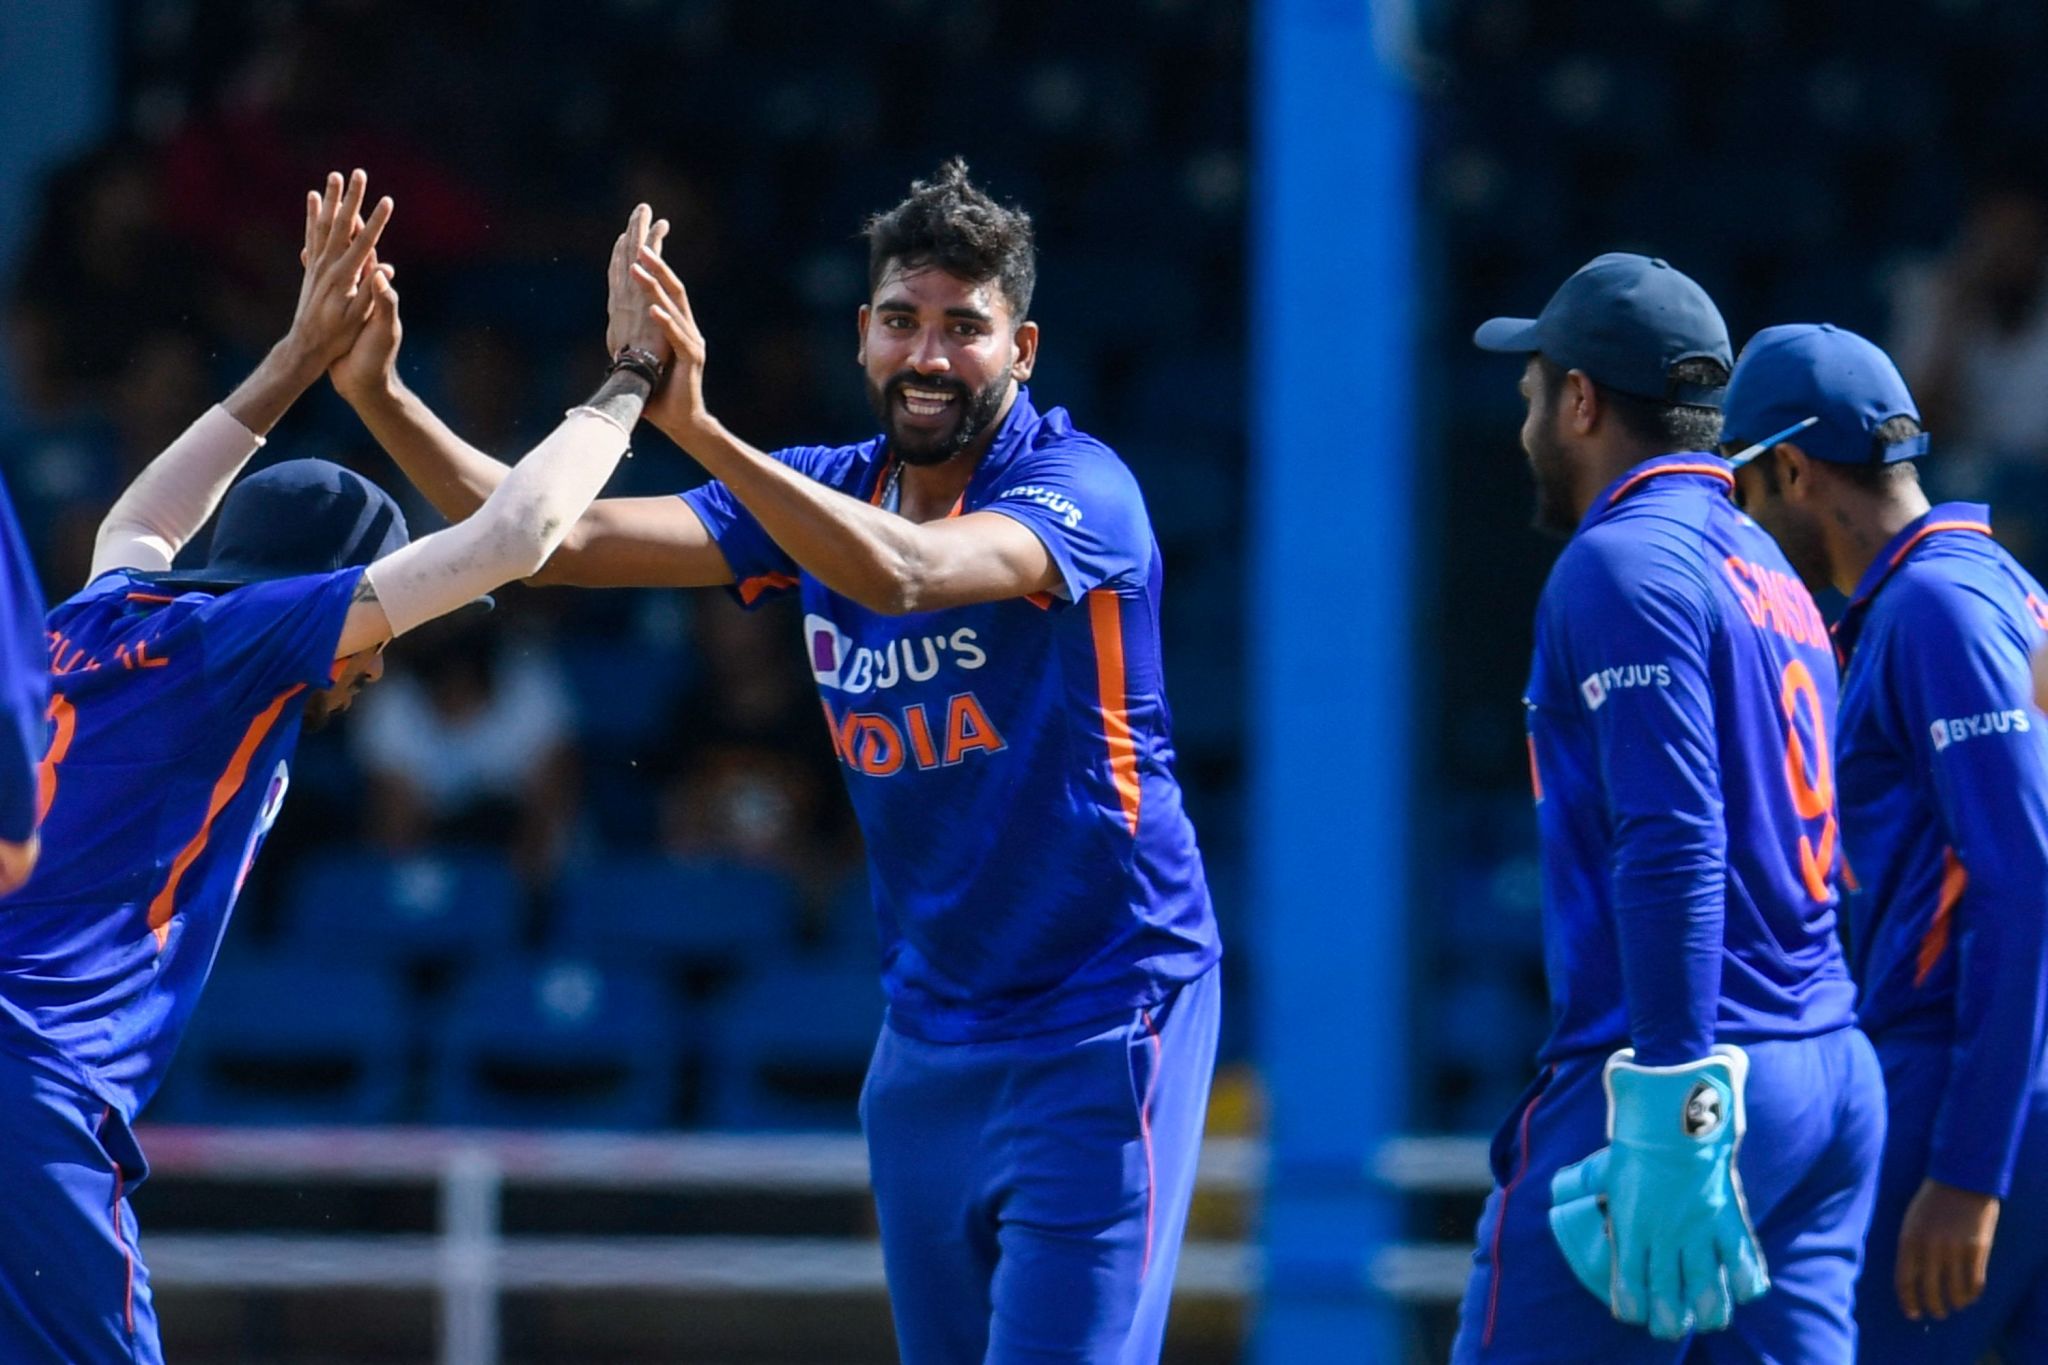 IND vs WI LIVE: Shubman Gill & Yuzvendra Chahal star as India thrash West Indies by 119 runs to clean-sweep series 3-0: Check 3rd ODI Highlights